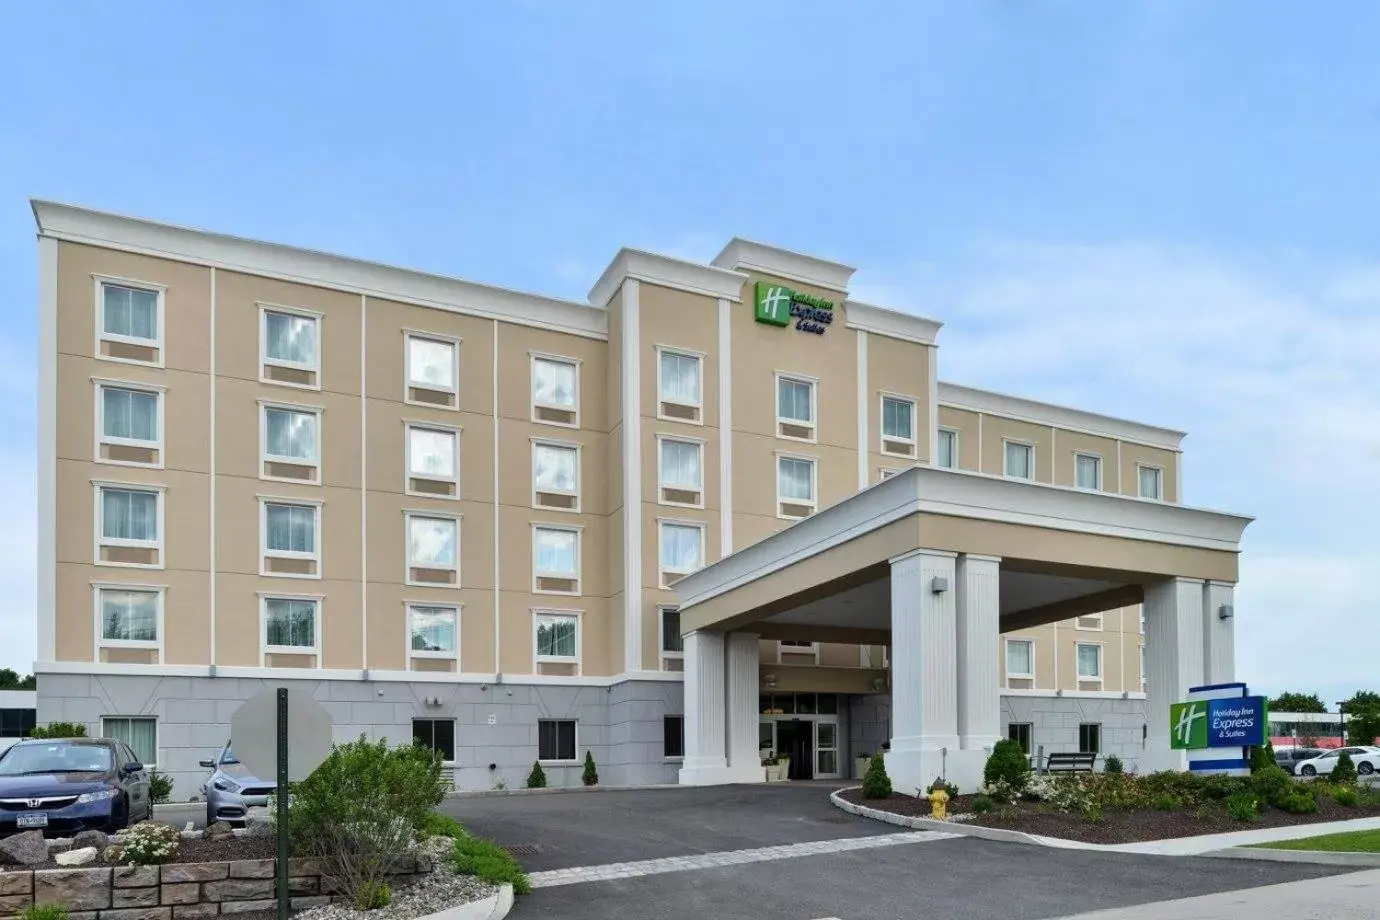 Property building in Holiday Inn Express & Suites Peekskill-Lower Hudson Valley, an IHG Hotel